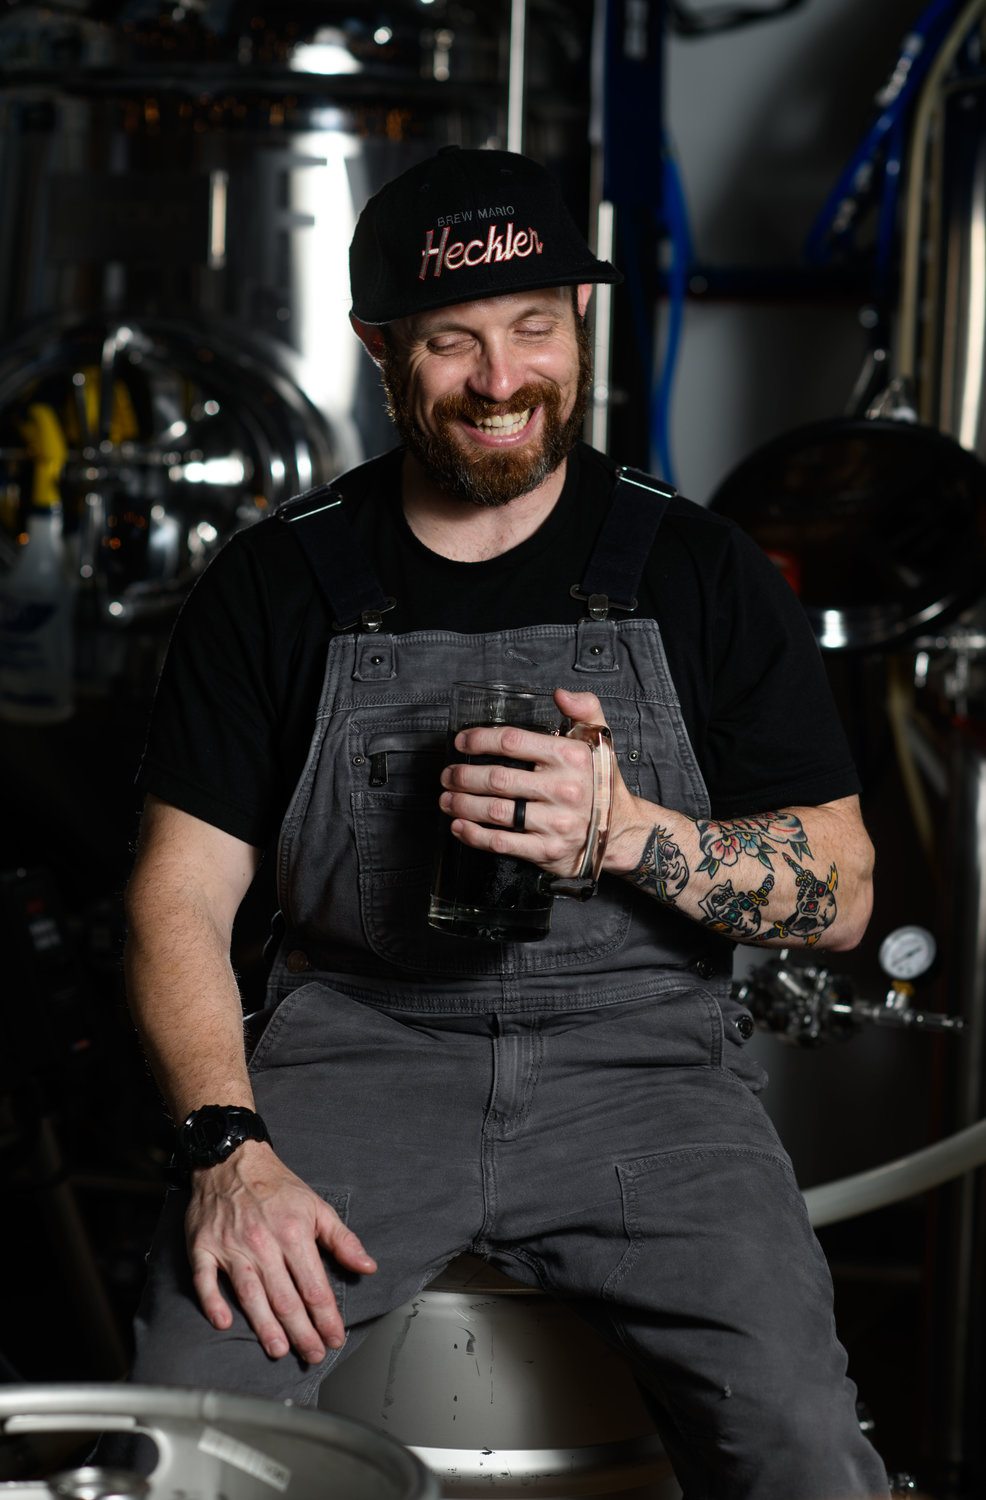 Assistant Brewer, Ken Bowman, poses for a portrait with his personal brew called Pirate Hooker, a milk stout he home brewed and then took to Heckler.